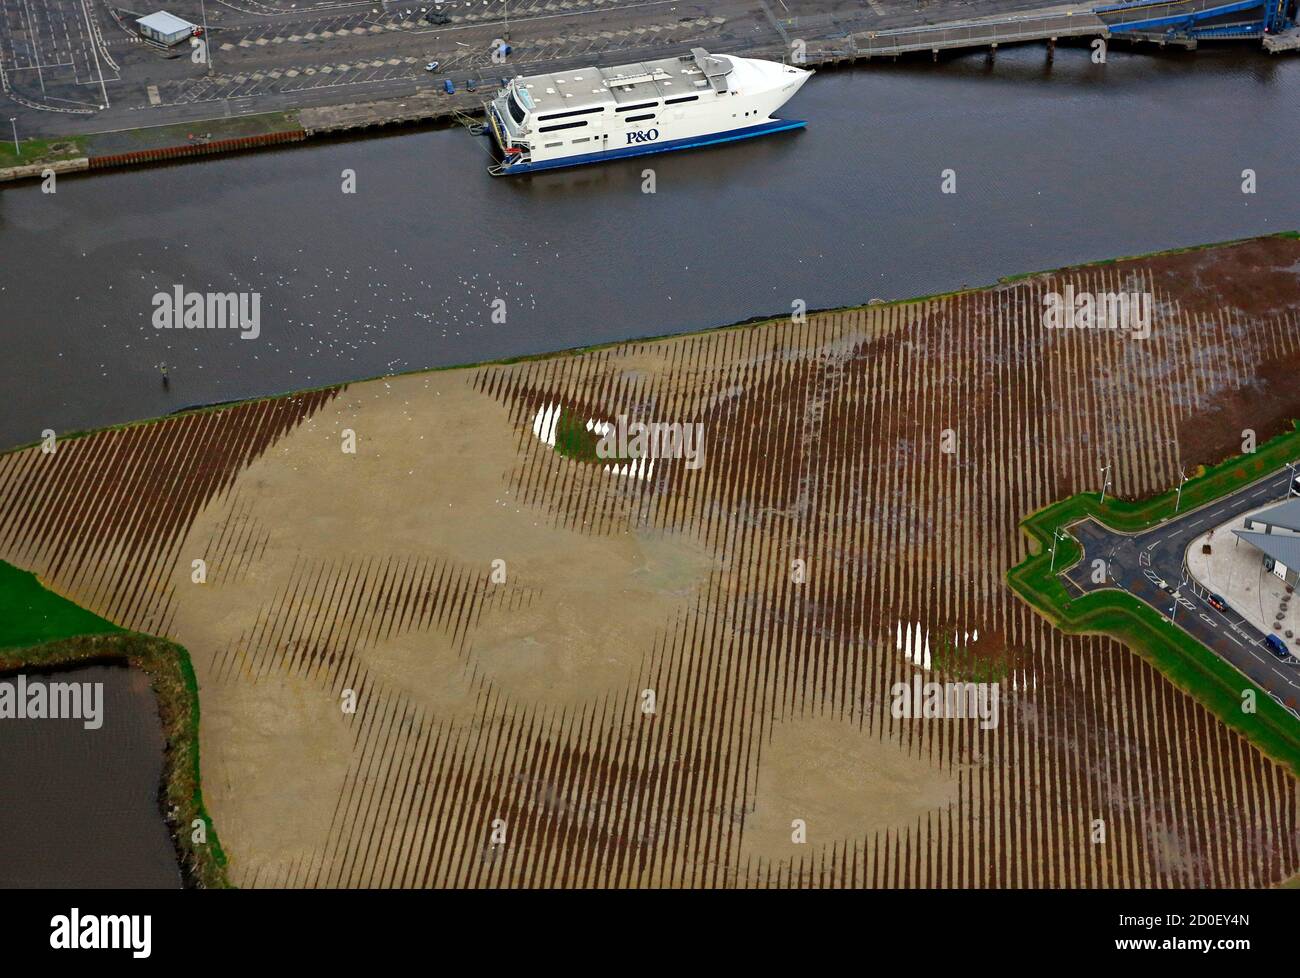 A piece of land art entitled 'Wish' showing the face of an anonymous six-year-old local Belfast girl is seen in this aerial view of the Titanic quarter in Belfast October 23, 2013. The artwork by Cuban-American artist Jorge Rodriguez-Gerada spans 11 acres, is made up from 2,000 tonnes of sand, 2,000 tonnes of soil and some 30,000 wooden pegs. It will remain on view until December 2013.  REUTERS/Cathal McNaughton (NORTHERN IRELAND - Tags: ENTERTAINMENT SOCIETY ENVIRONMENT) Stock Photo